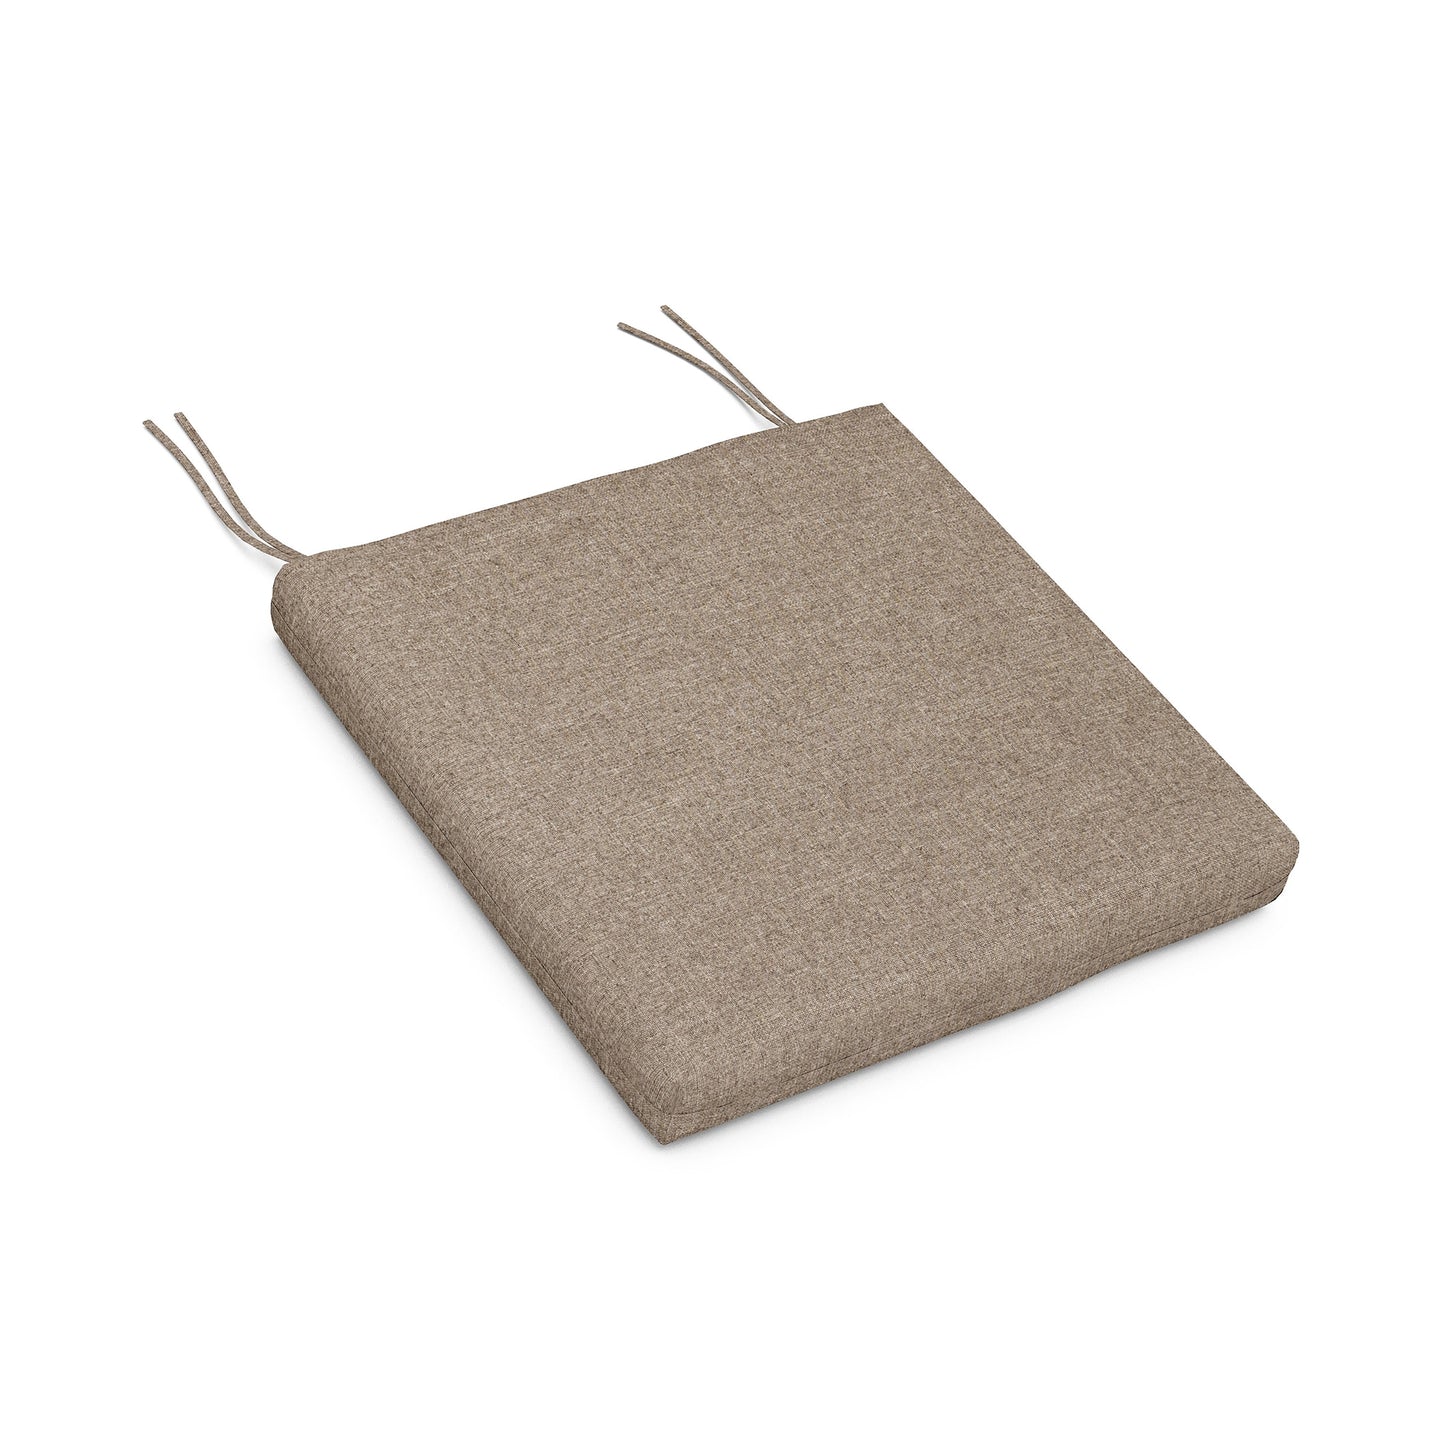 A ceramic capacitor with a beige rectangular body and two silver leads extending from one side, isolated on a white background with POLYWOOD® XPWS0172 - Seat Cushions.